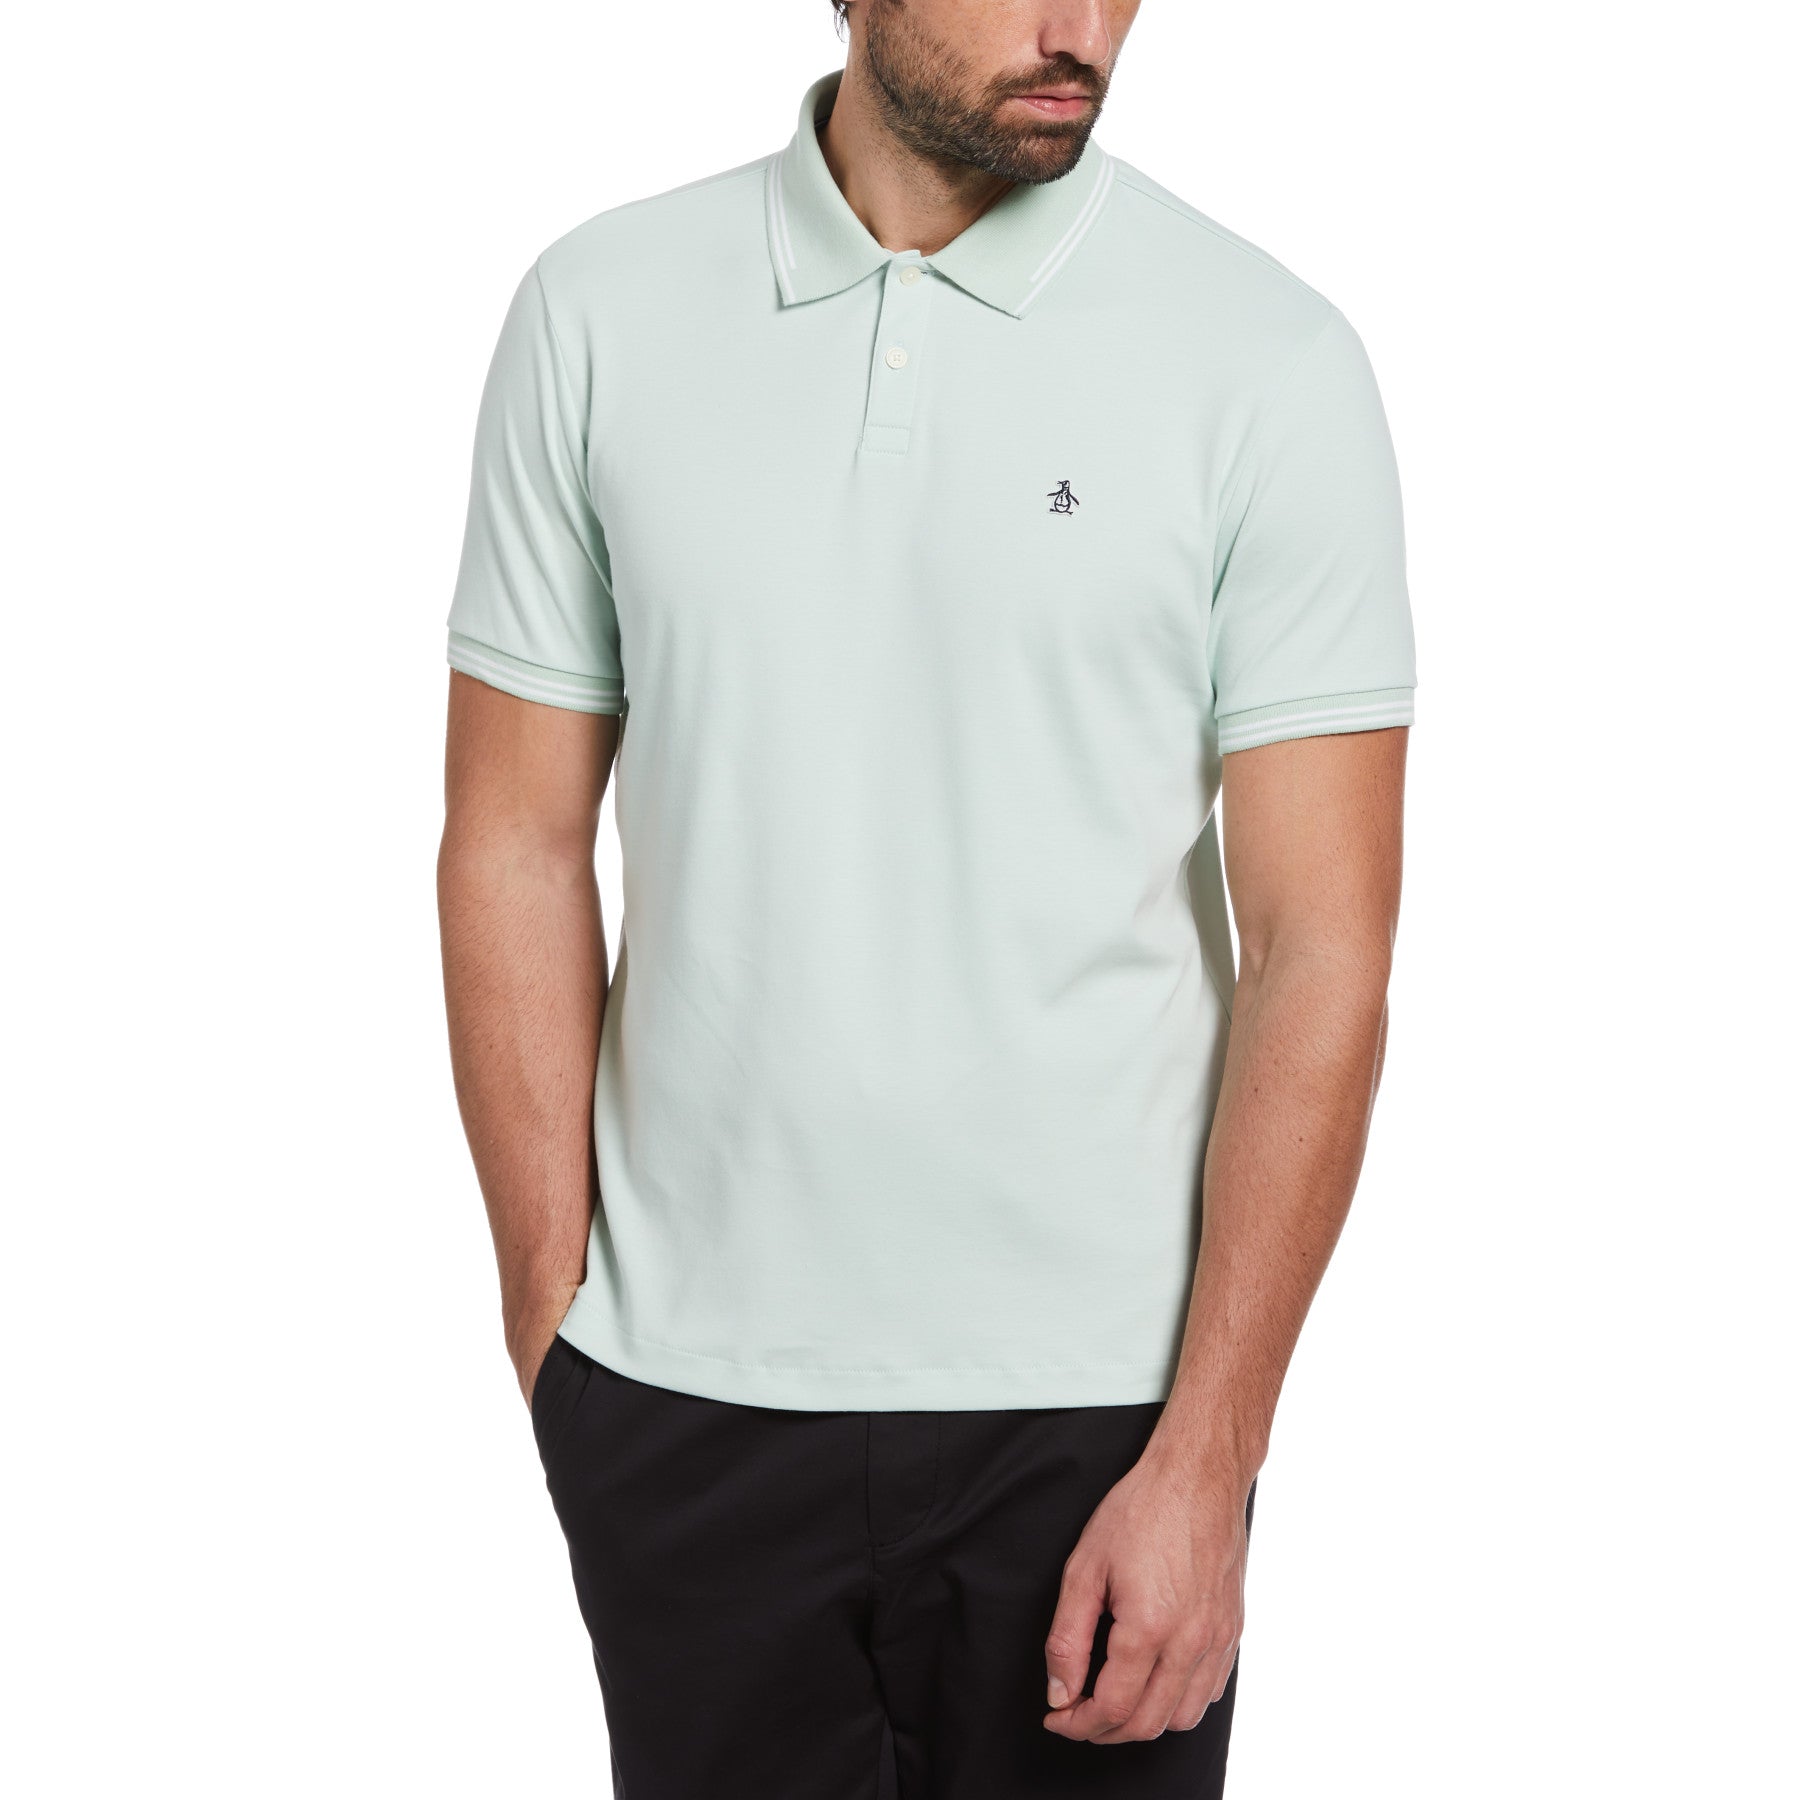 View Sticker Pete Knit Polo Shirt In Surf Spray information